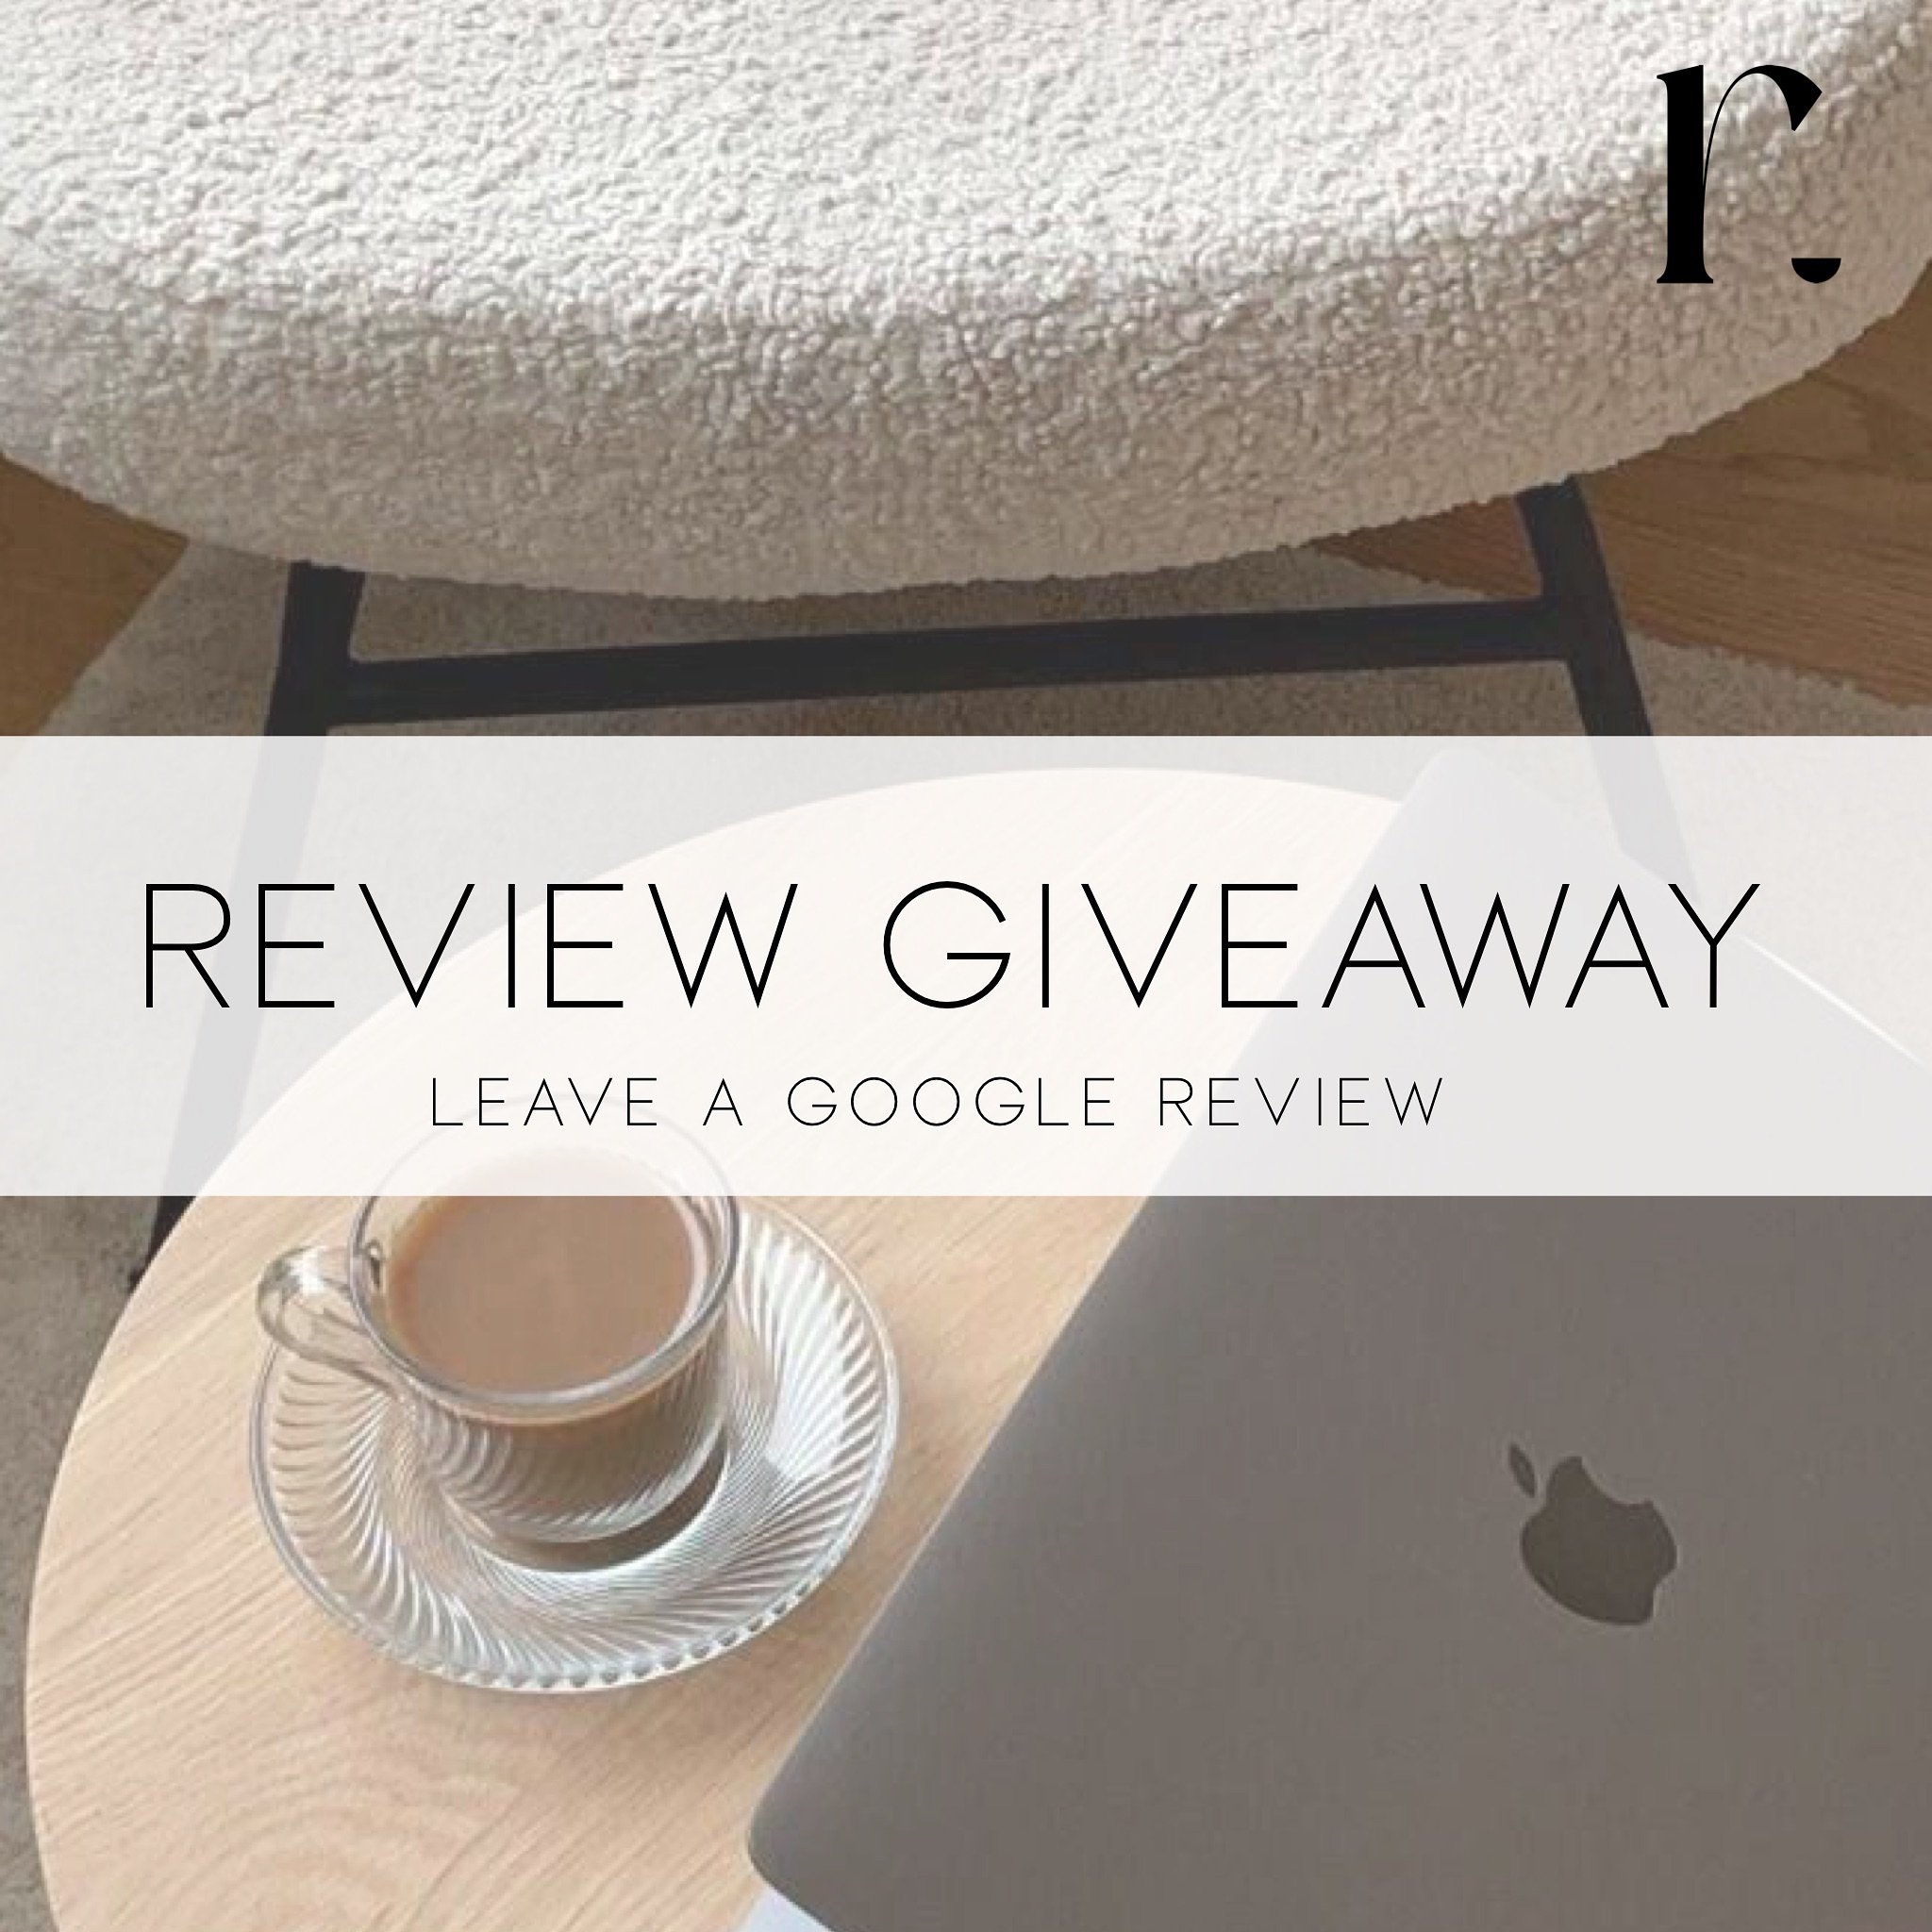 Exciting Review Giveaway Alert‼️

Share your feedback on Google for a shot at winning a $50 The Row gift card! Three lucky winners will be revealed tomorrow evening. 🤩

Visit our Google page and recount your experience at The Row. Kindly note that o